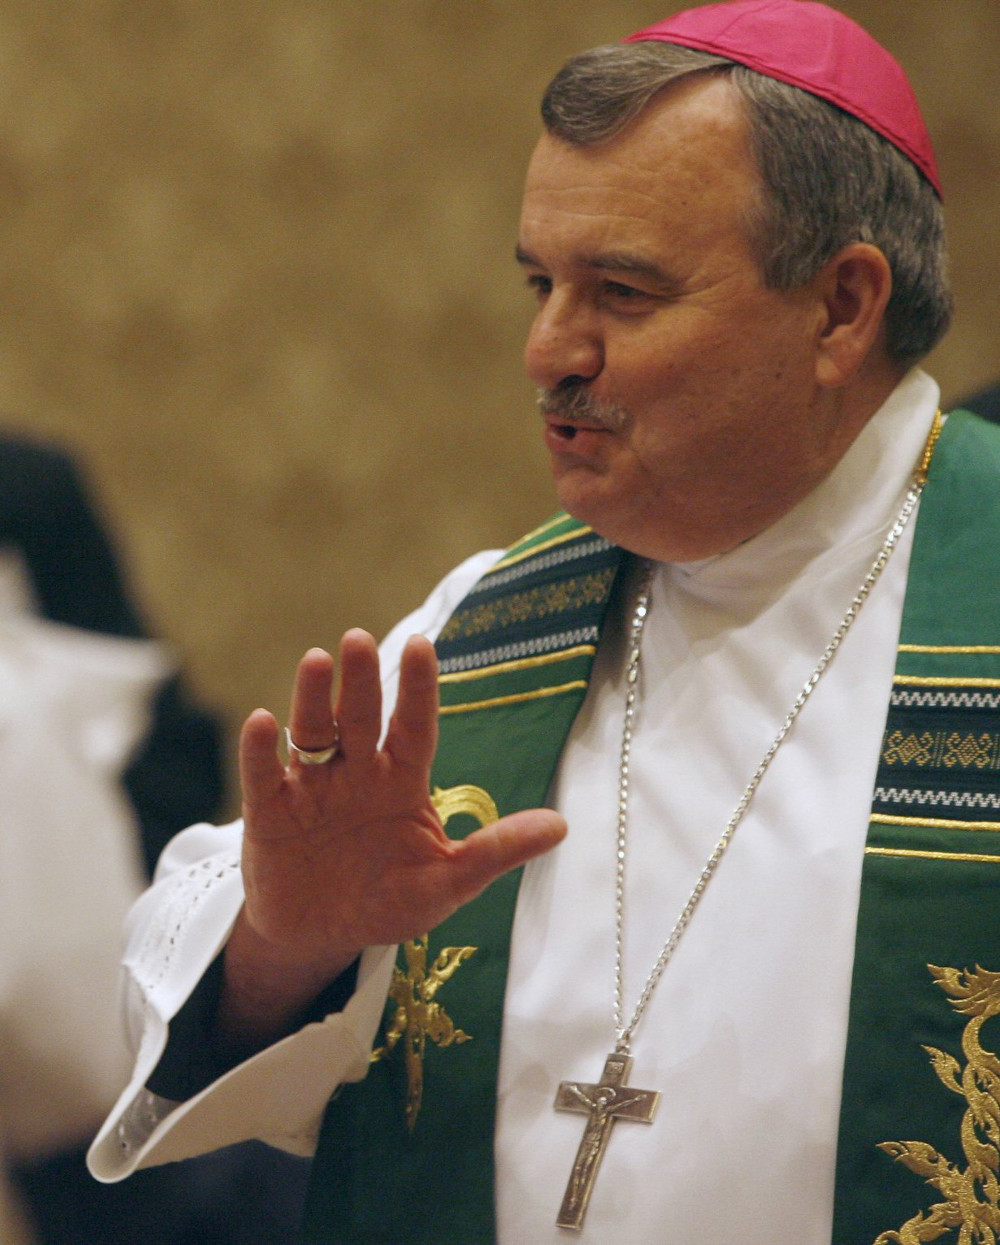 A white man with a moustache wears a violet zucchetto and green stole over white vestments as he talks and gestures